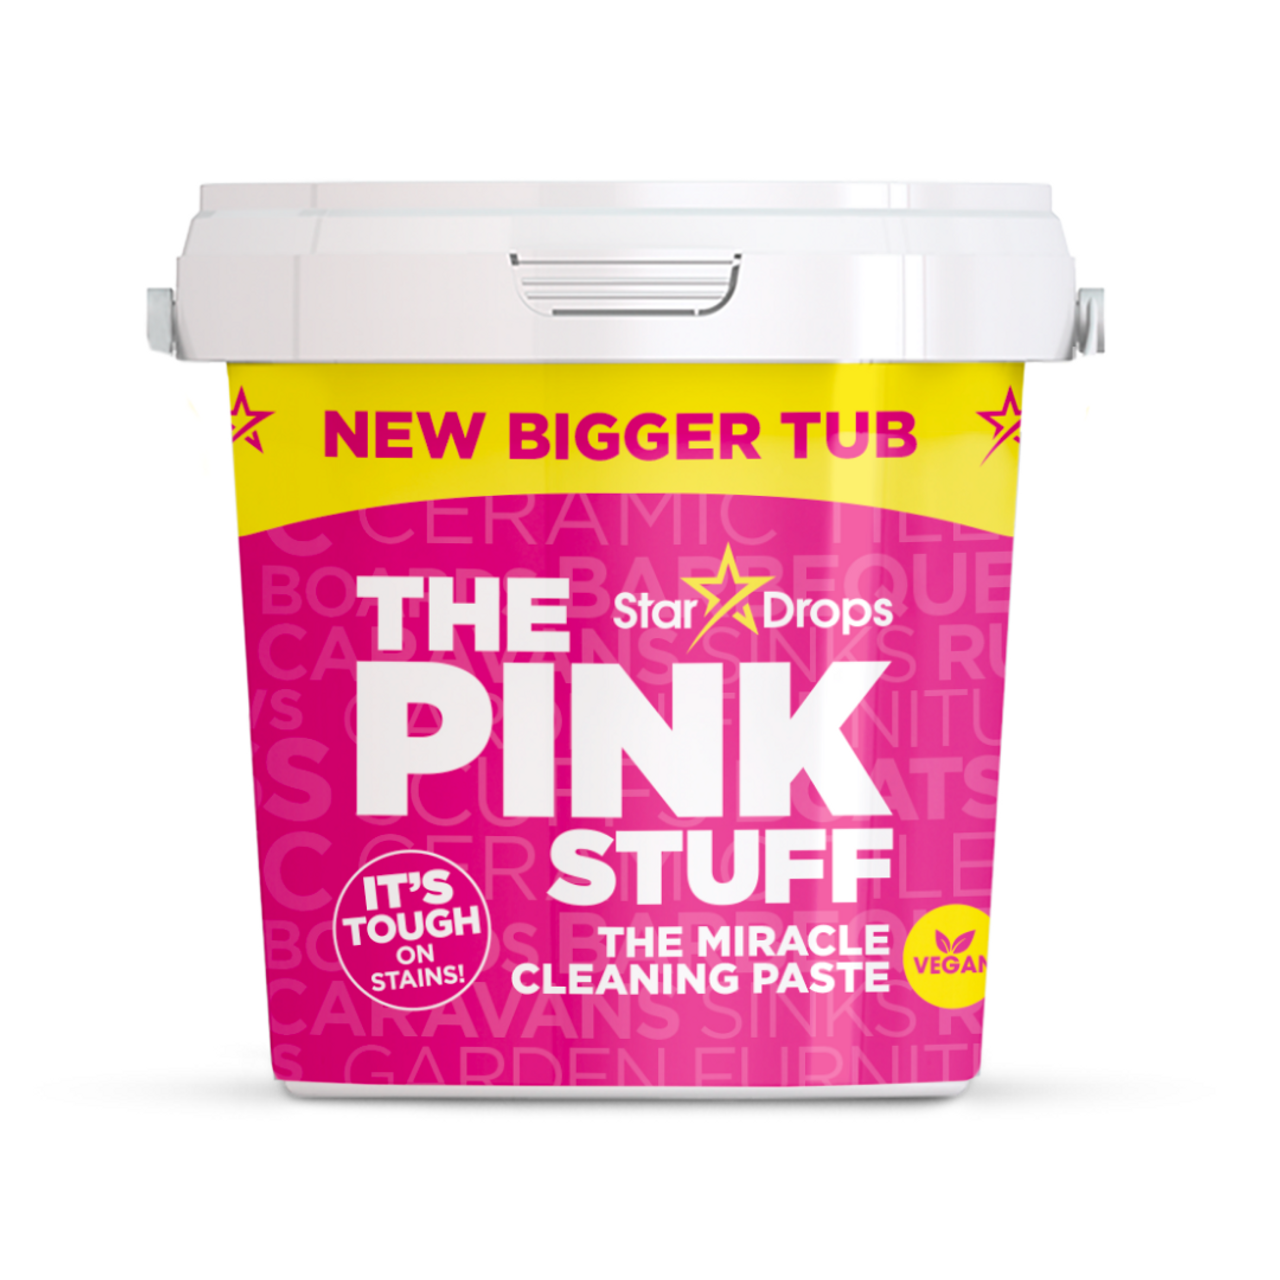 https://cdn11.bigcommerce.com/s-cbxe6j9t/images/stencil/1280x1280/products/460/2611/the-pink-stuff-850g-tub-product-image__10983.1648101202.png?c=2?imbypass=on